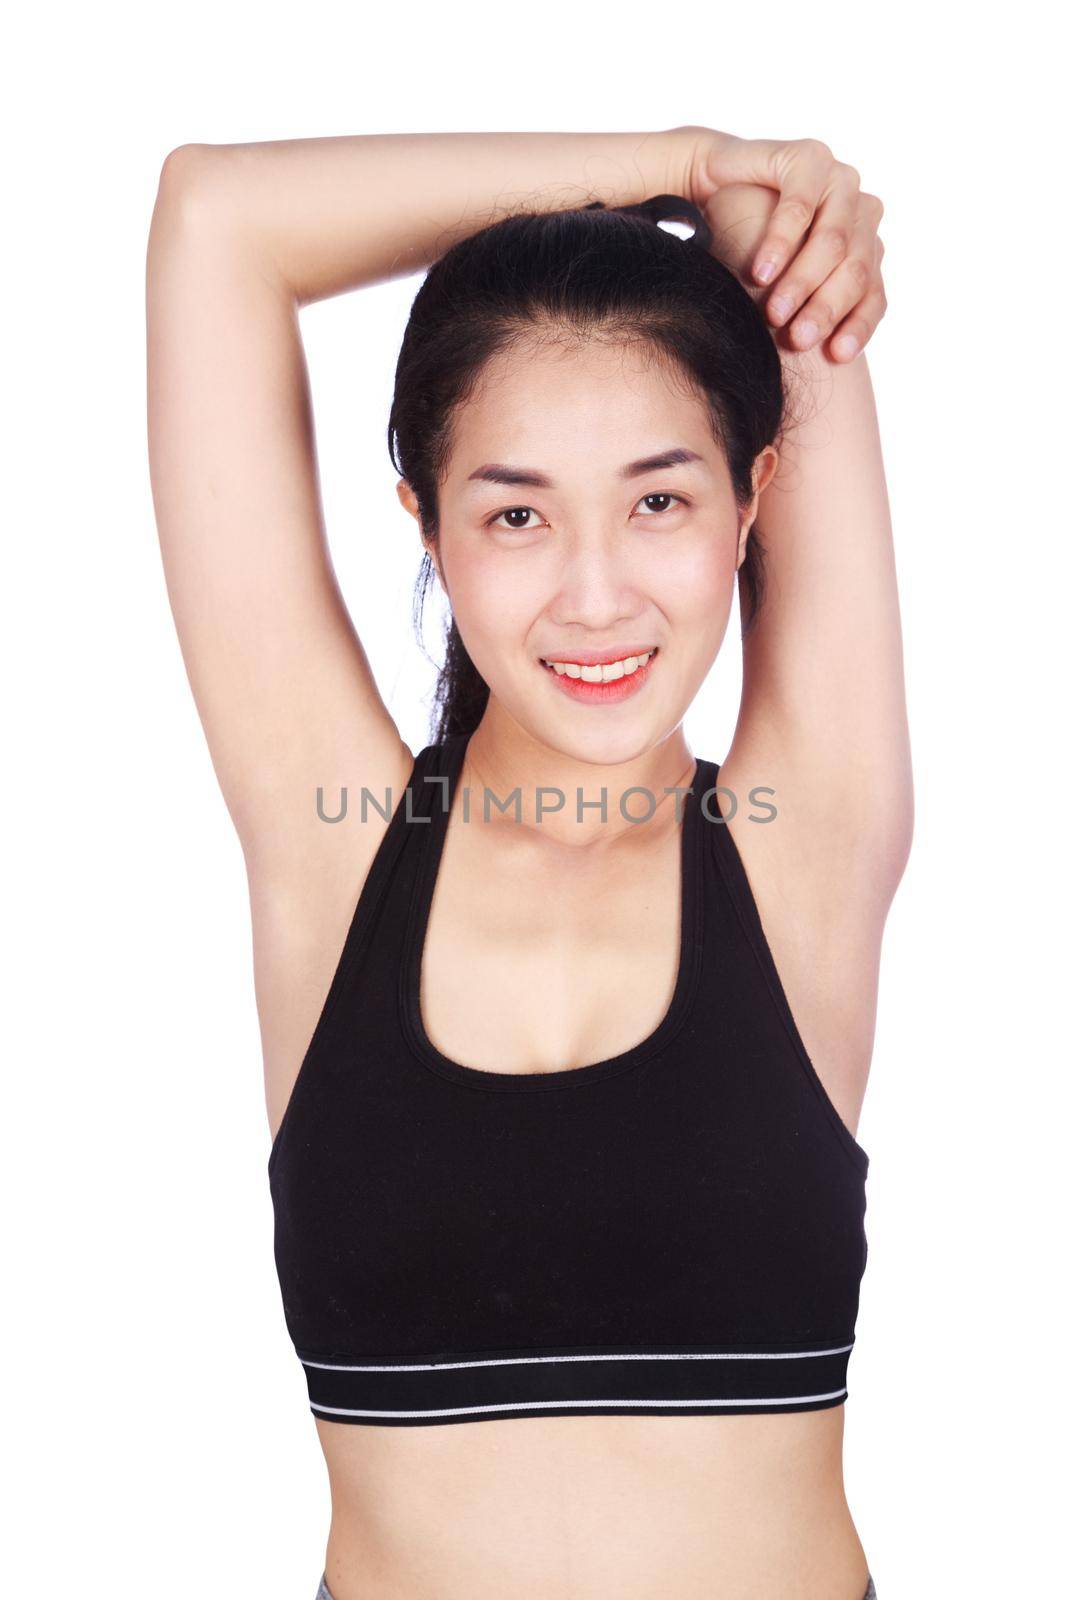 fitness woman stretching the muscles of her arms isolated on white background by geargodz